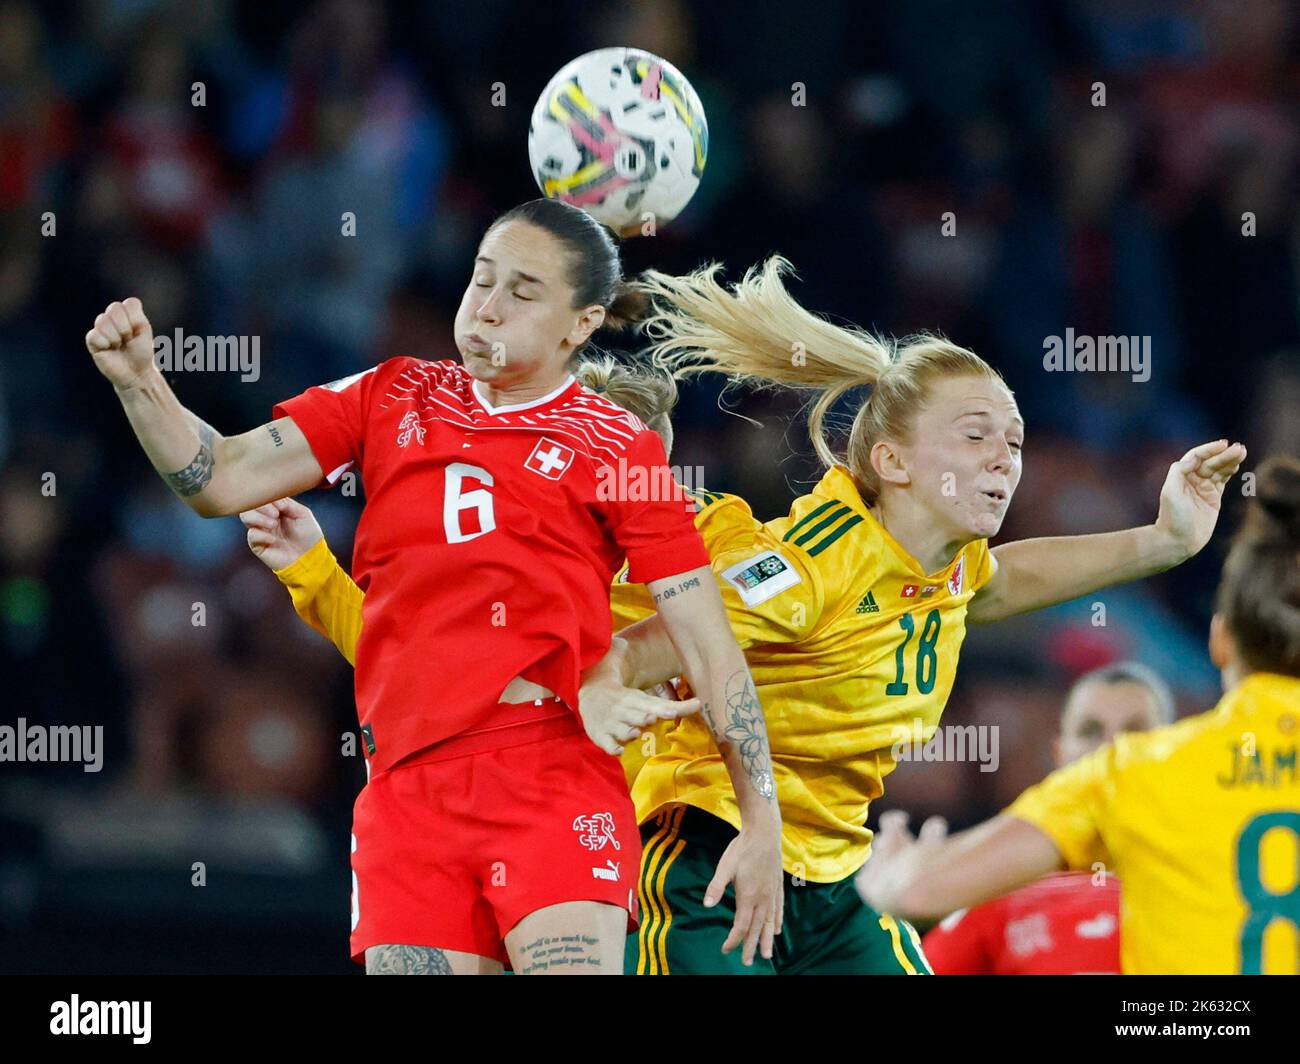 Soccer Football - FIFA Women's World Cup - UEFA Qualifiers - Switzerland v Wales - Stadion Letzigrund, Zurich, Switzerland - October 11, 2022 Switzerland's Geraldine Reuteler in action with Wales' Ceri Holland REUTERS/Stefan Wermuth Stock Photo